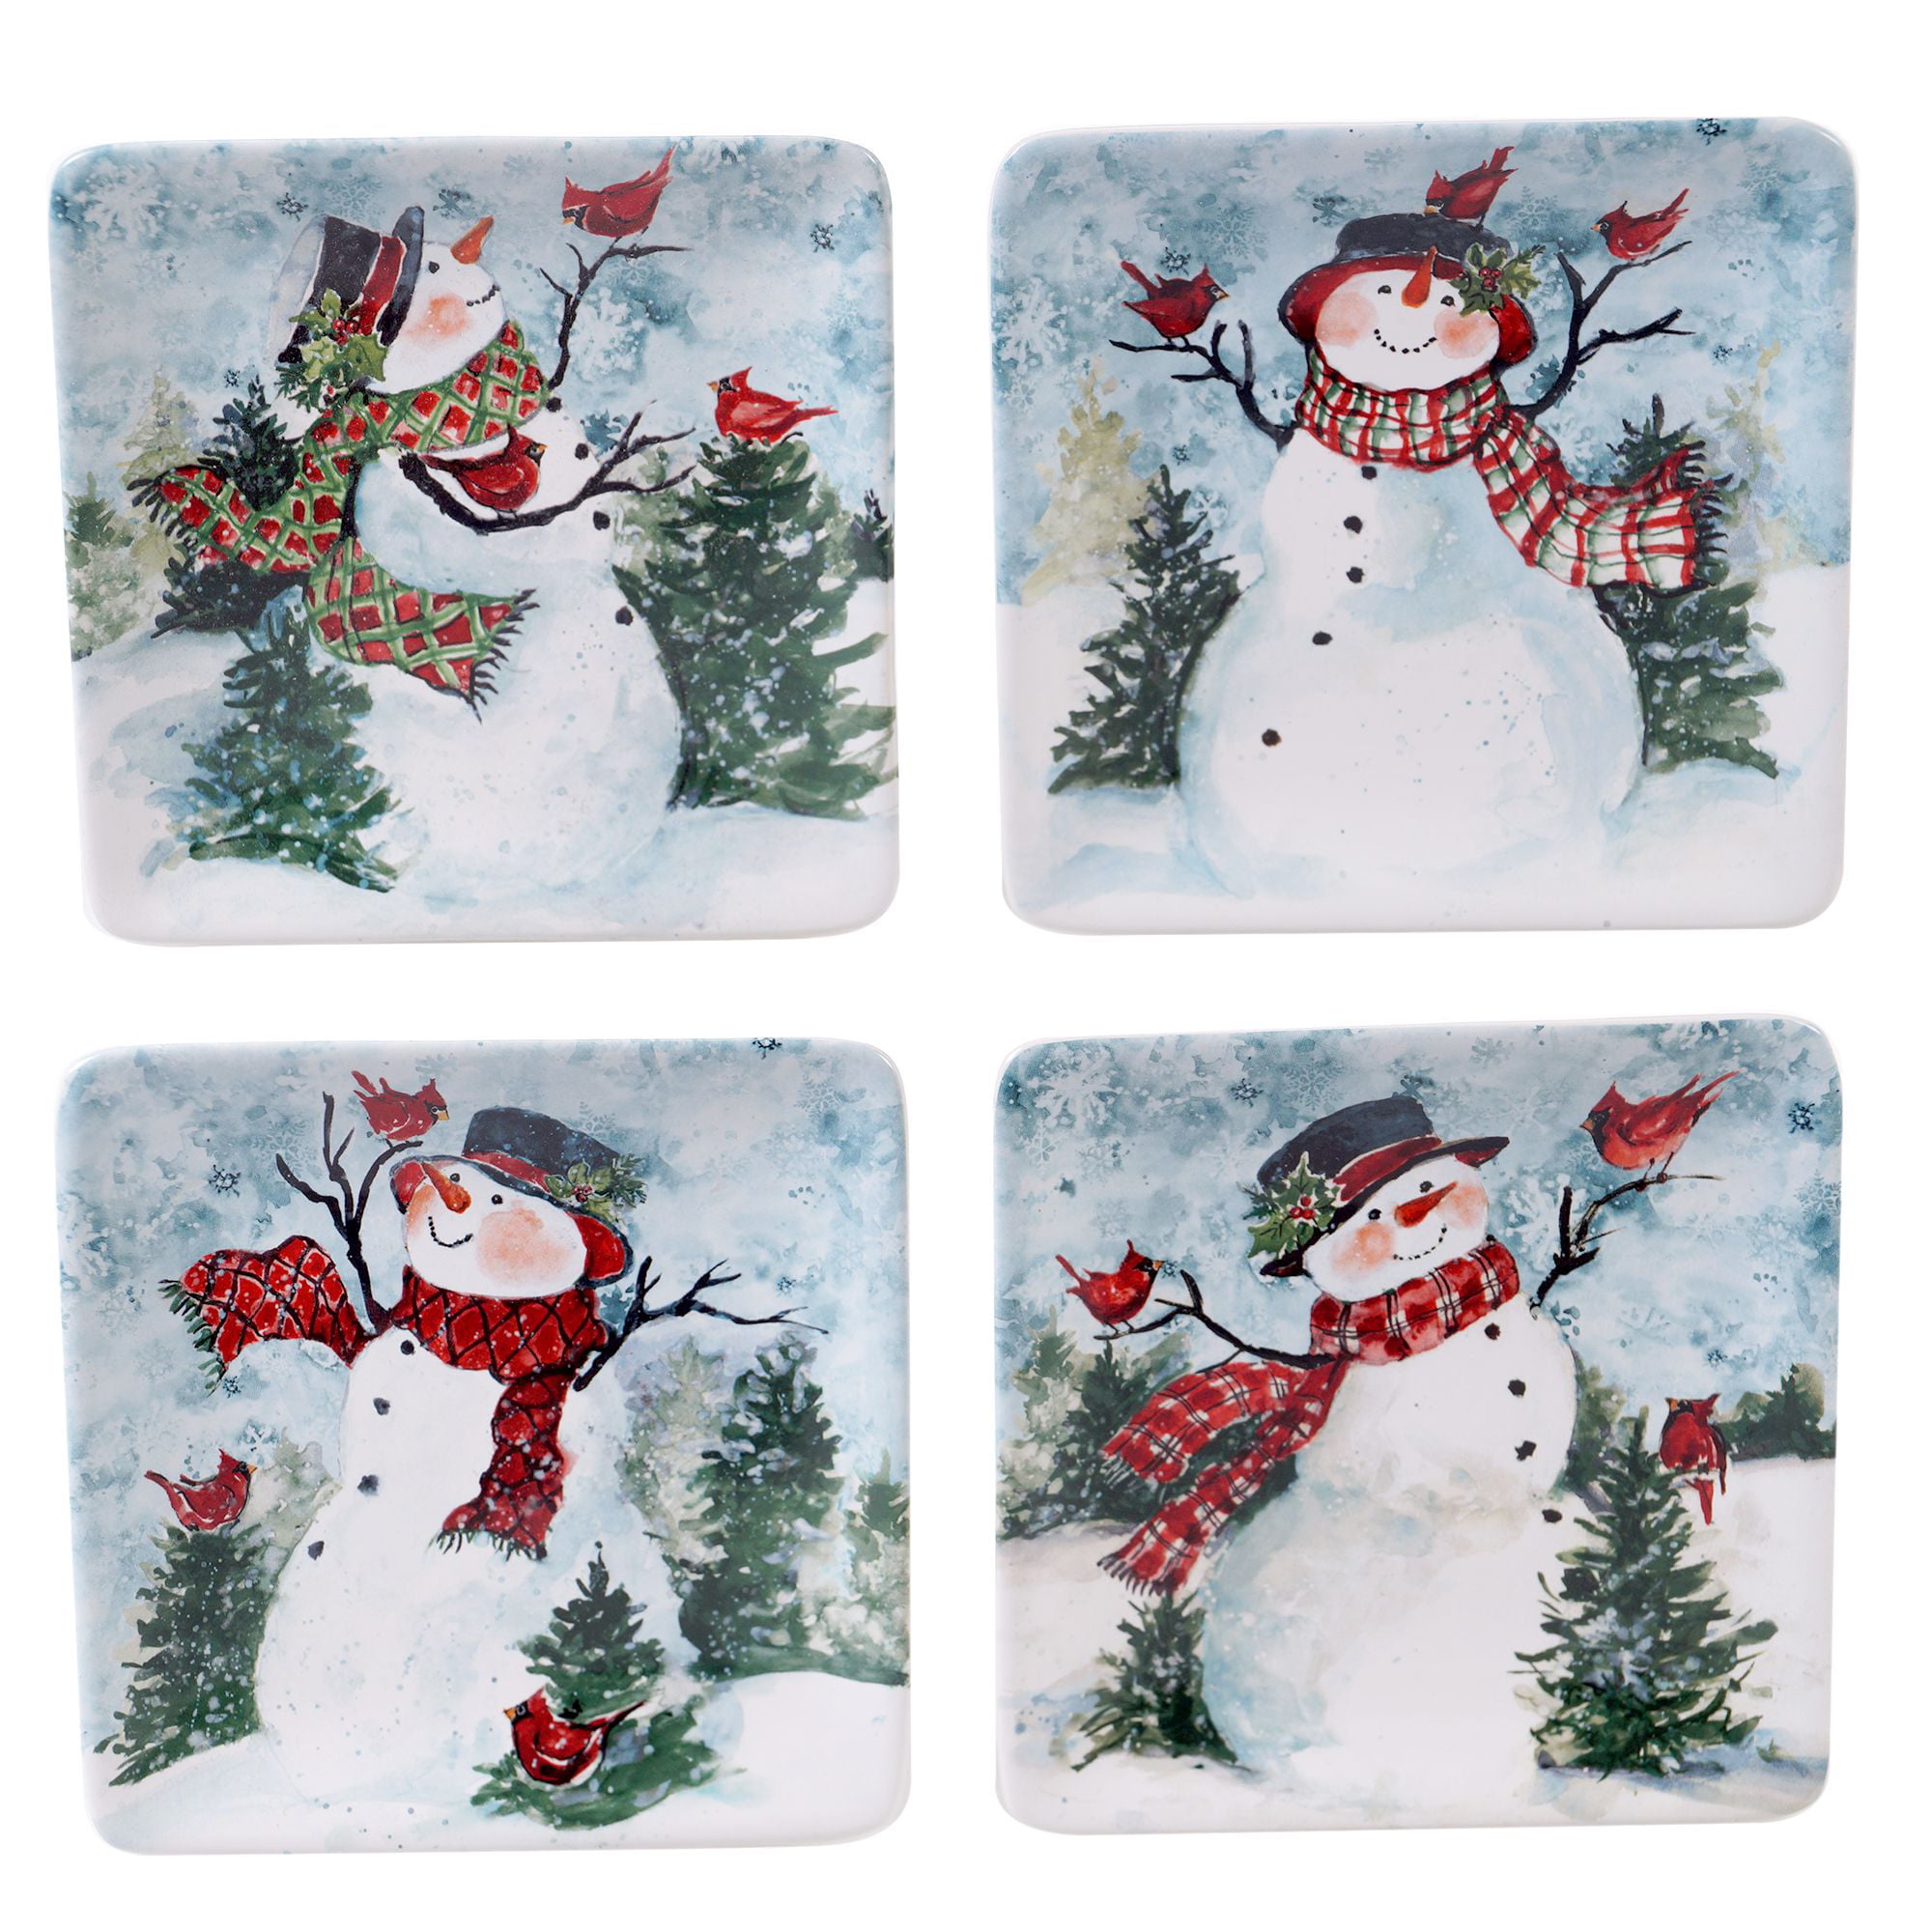 Christmas Snowman Place Name Cards Table Cards Tent Cards Snowman Die Cut Design for Christmas Winter Theme Frozen Theme Party 30 Sheet